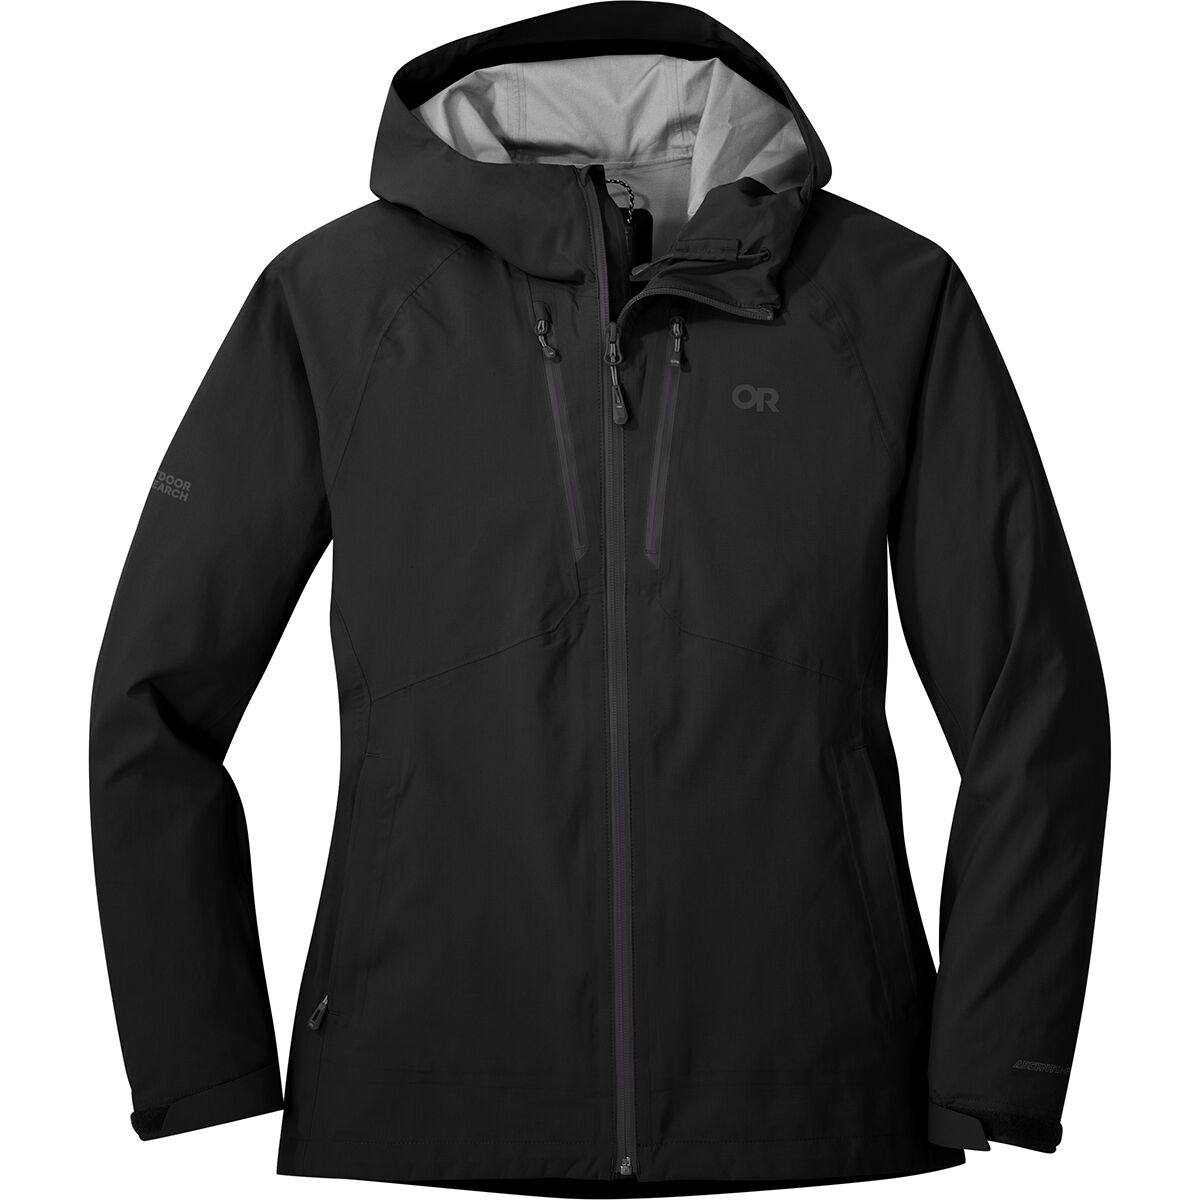 Outdoor Research MicroGravity Jacket - Women's